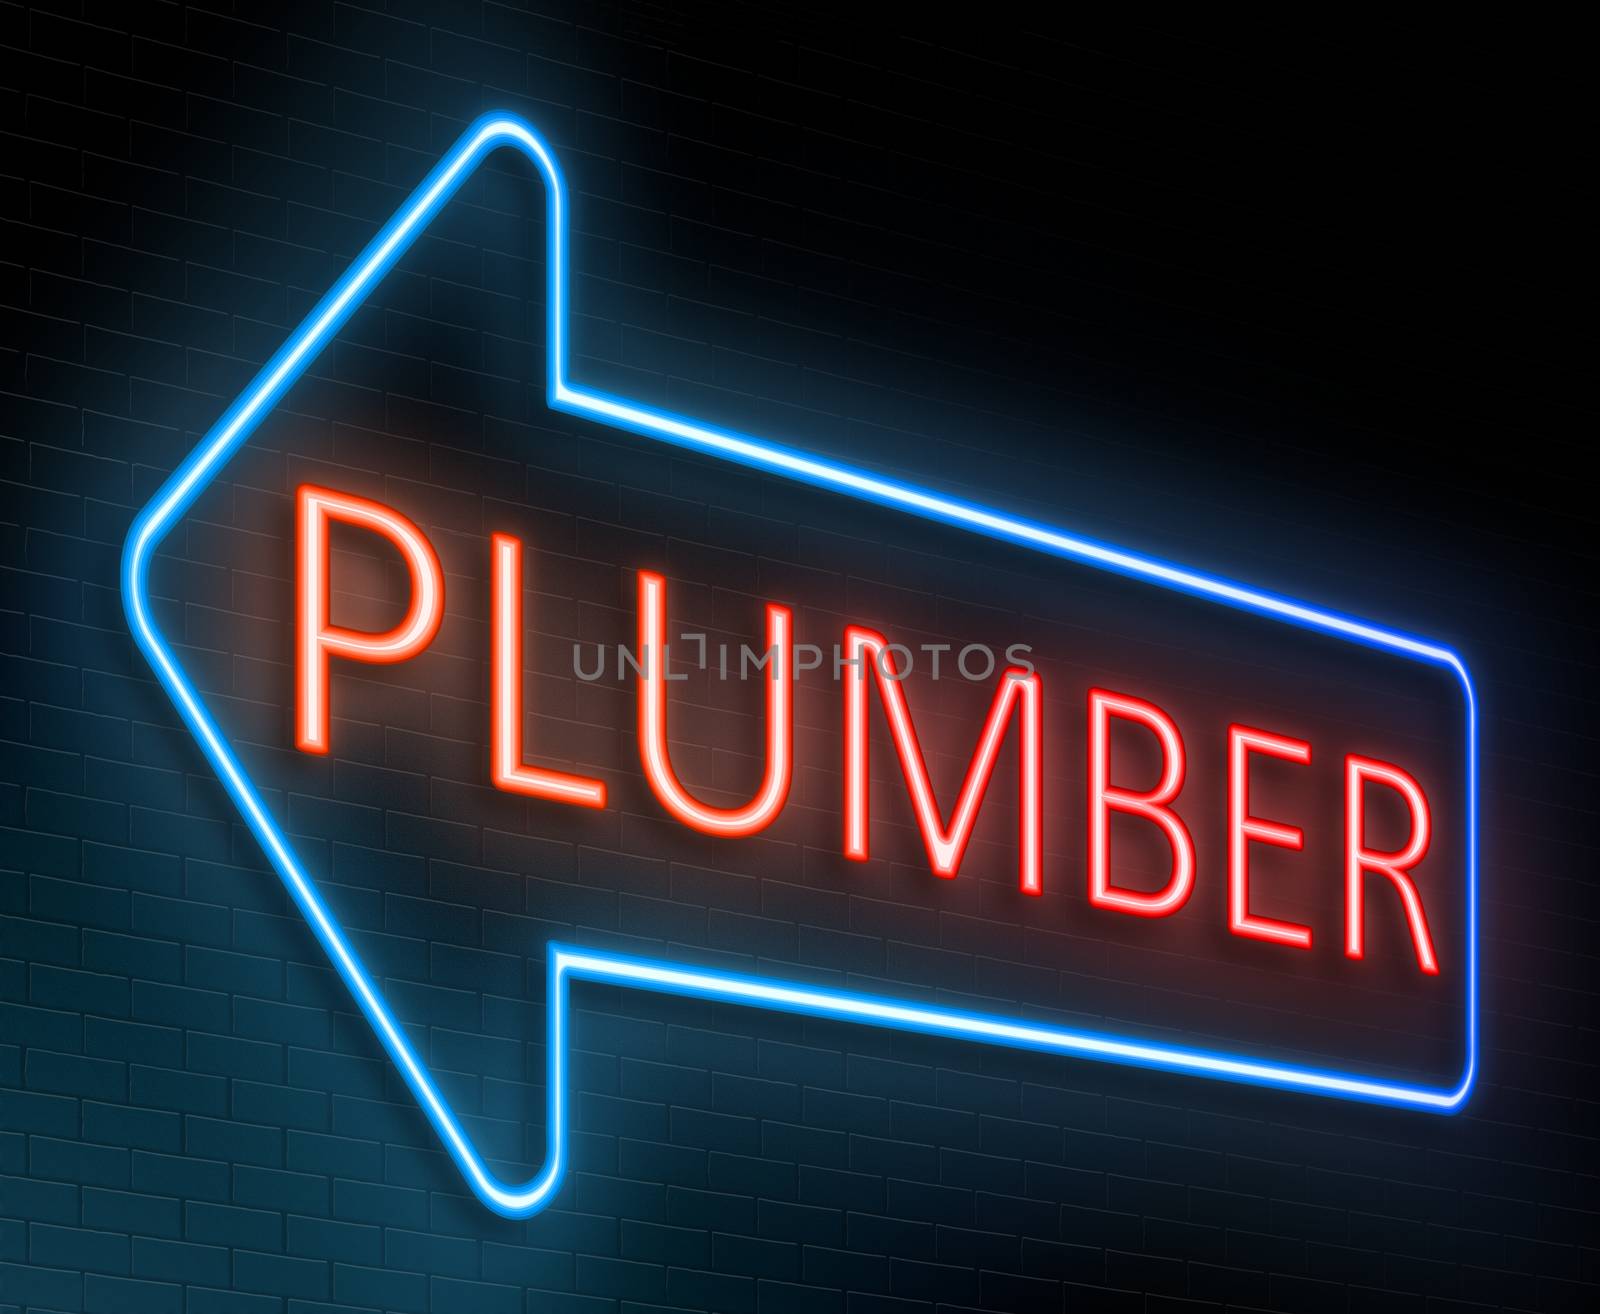 Illustration depicting an illuminated neon sign with a plumber concept.